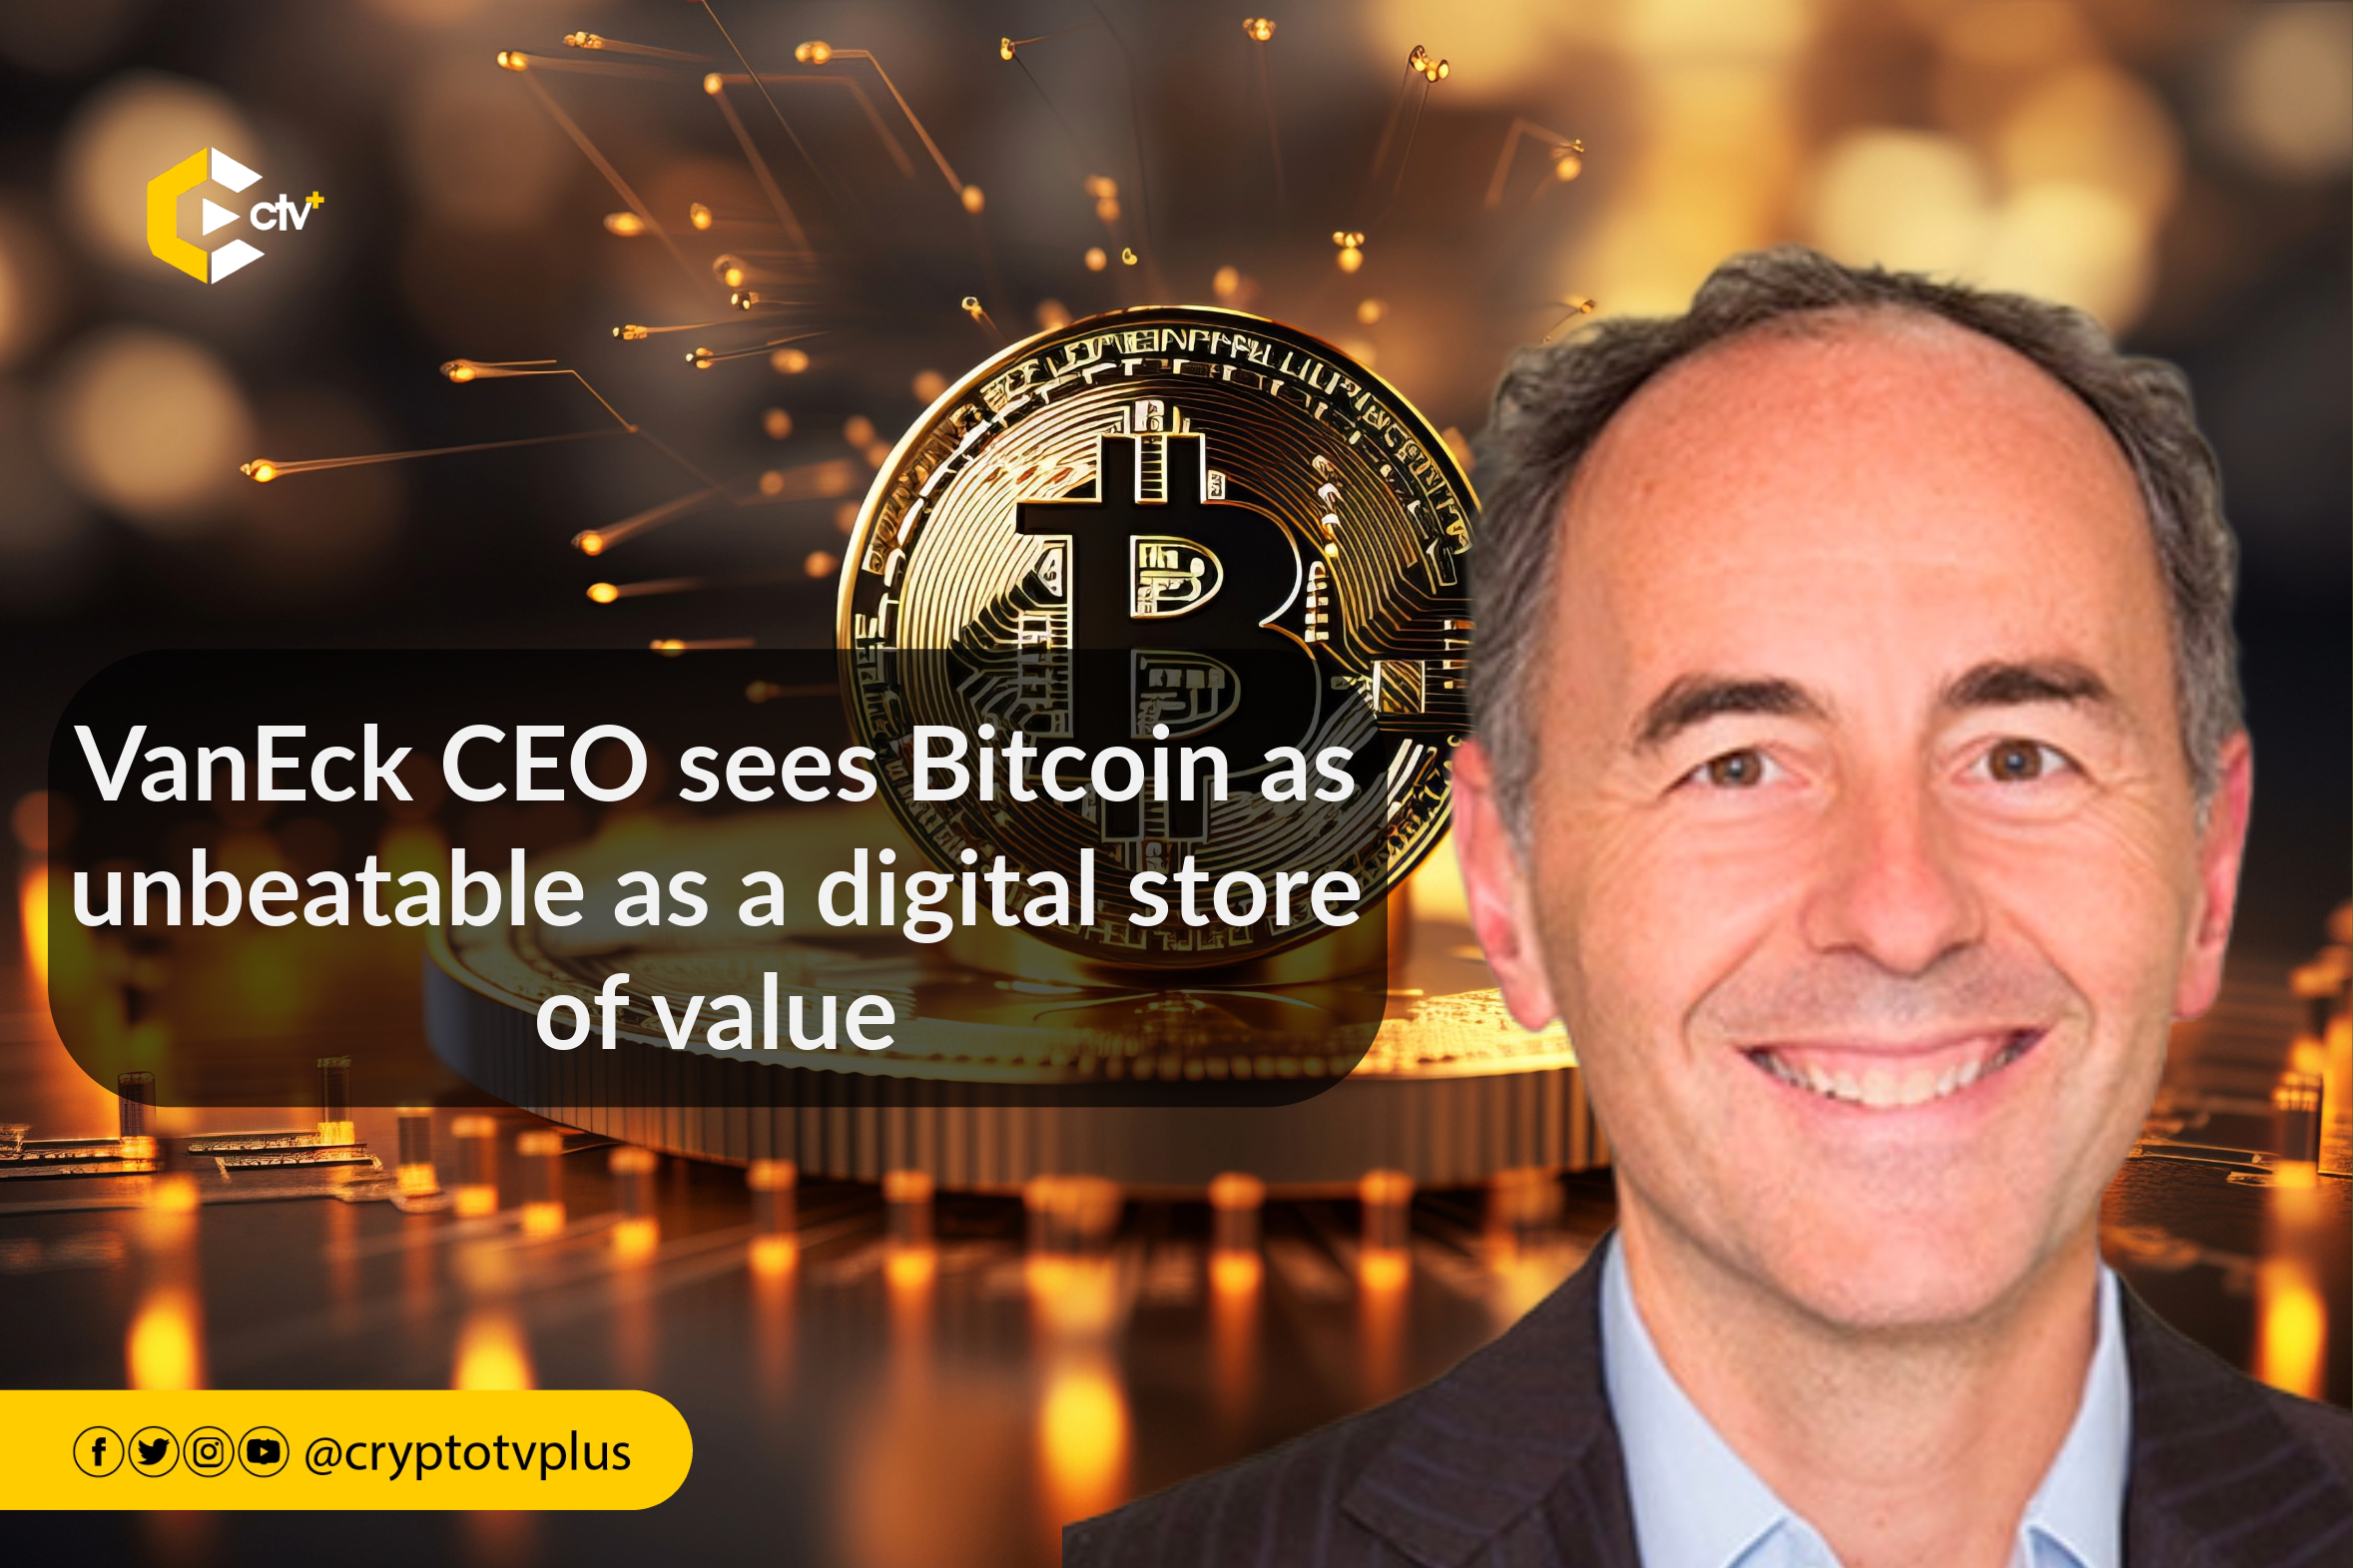 VanEck CEO sees Bitcoin as unbeatable as a digital store of value